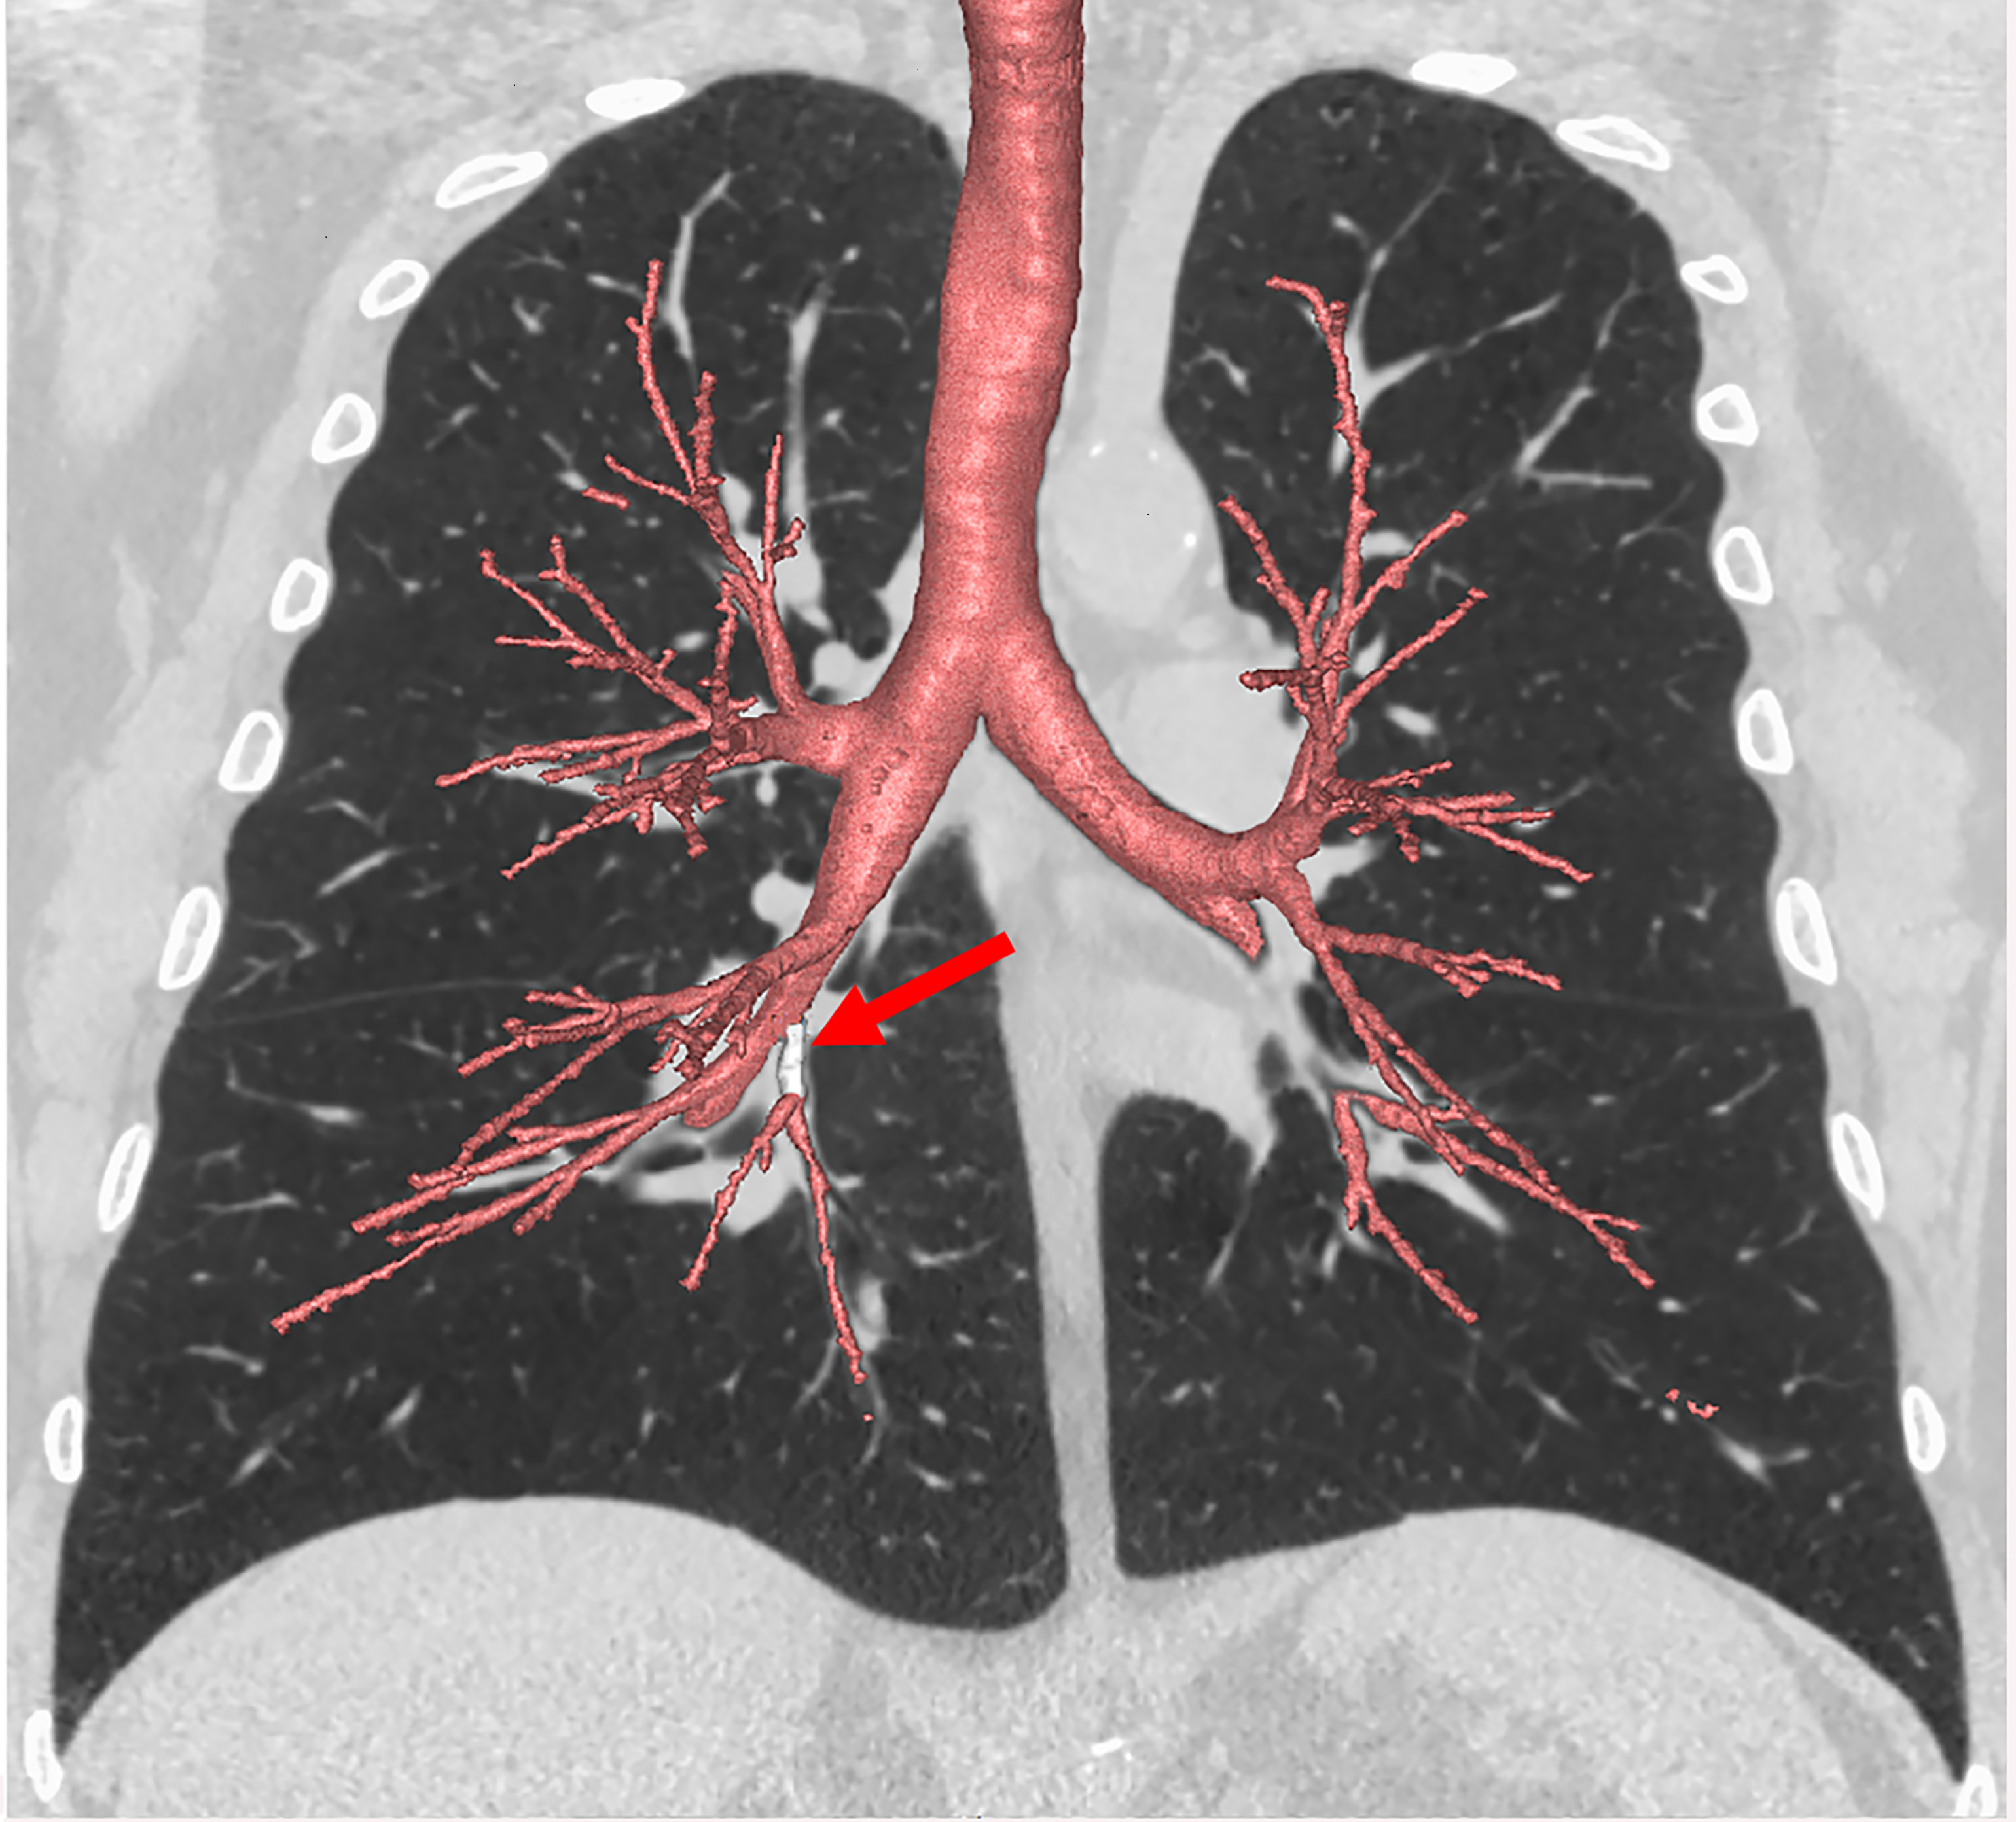 Images of the lungs highlighting the airway branches